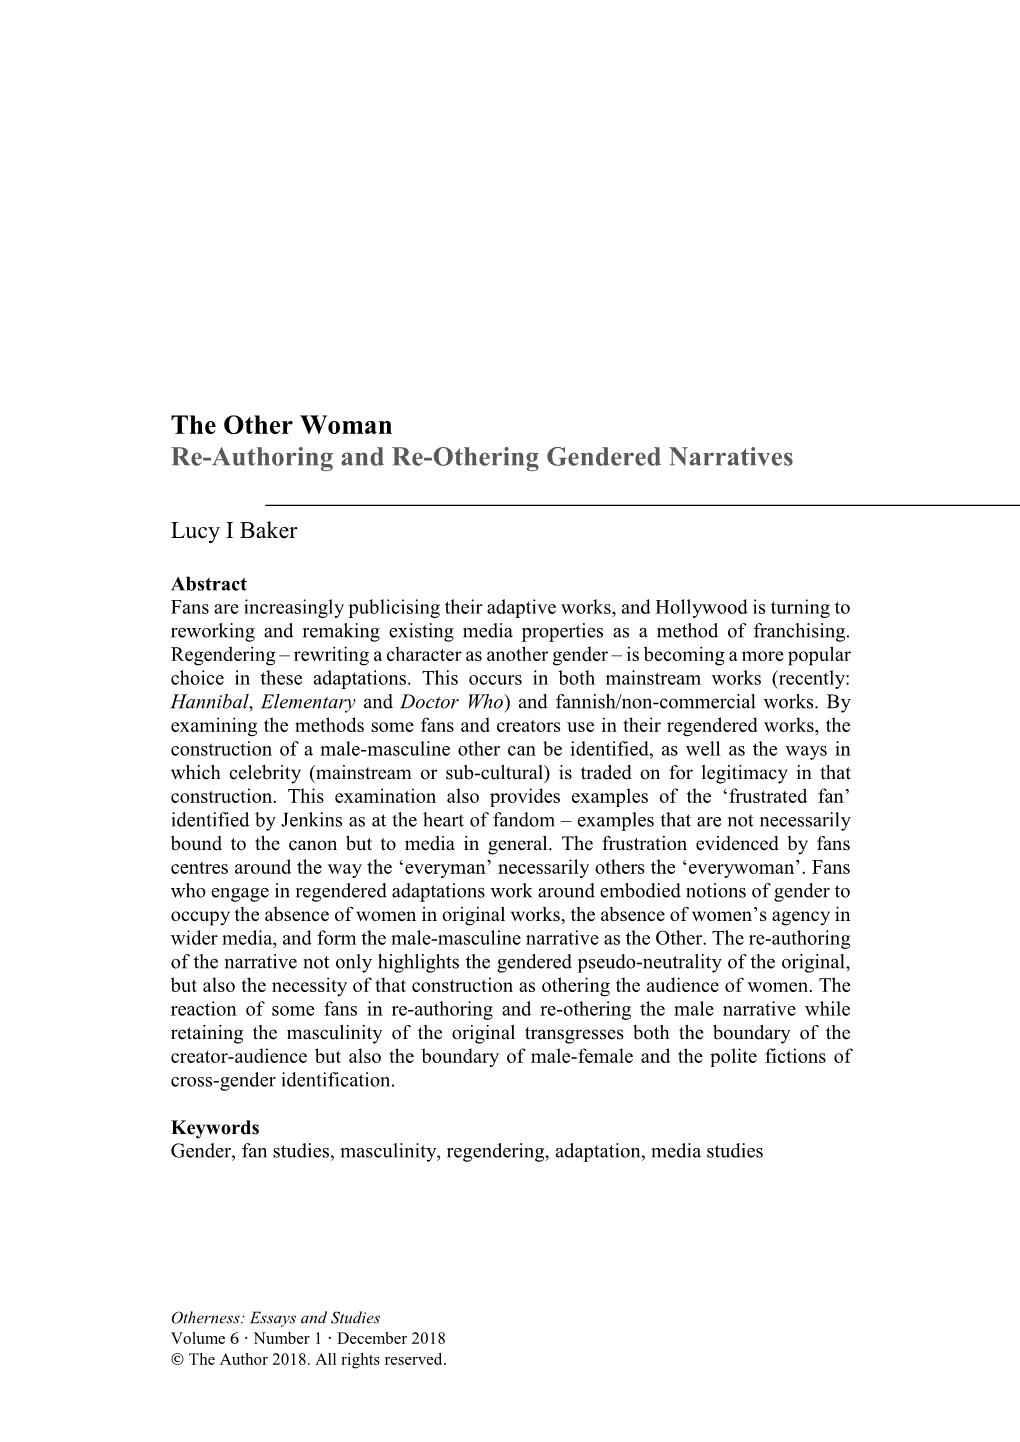 The Other Woman Re-Authoring and Re-Othering Gendered Narratives